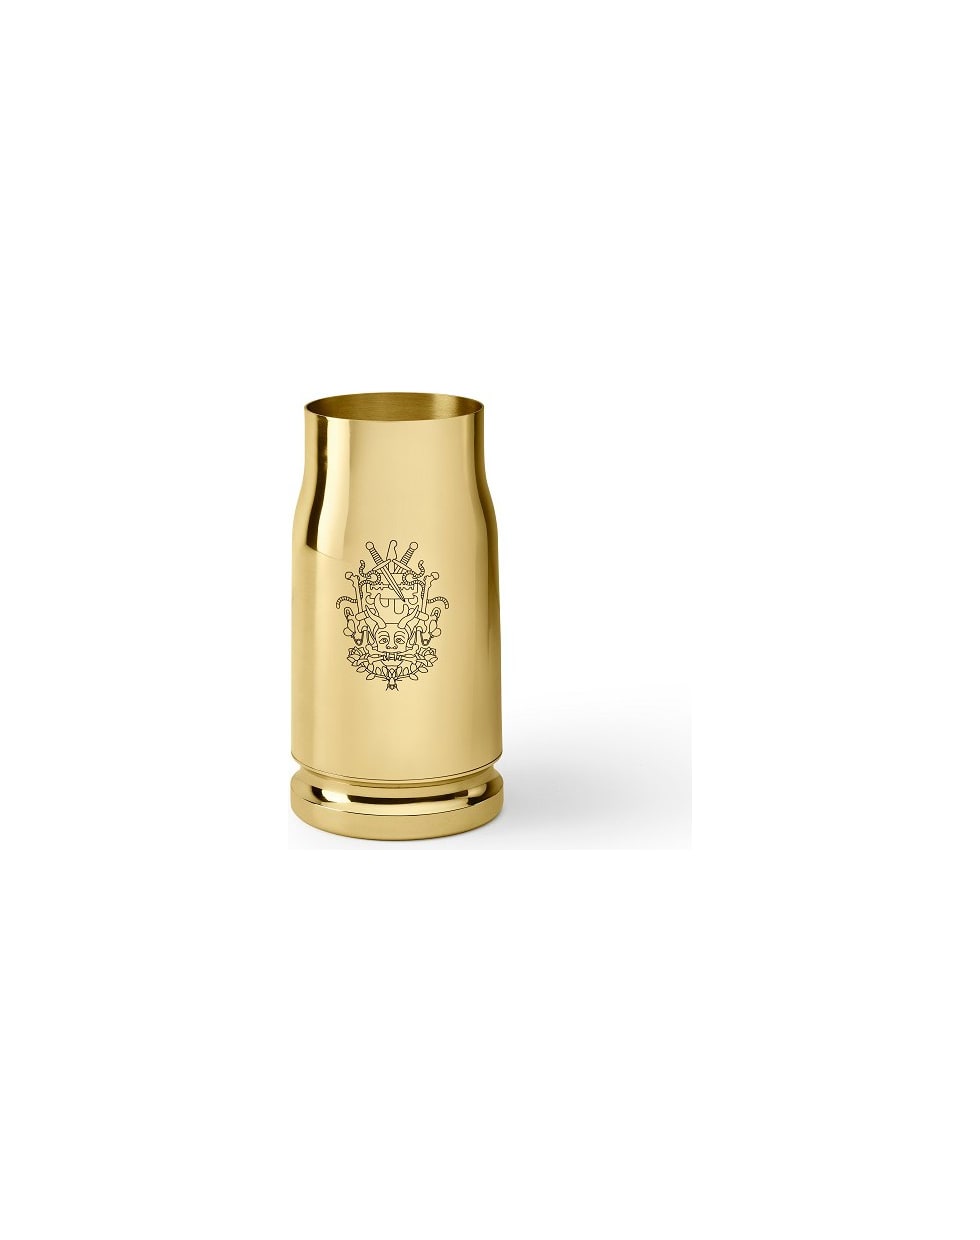 Ghidini 1961 Nowhere (bullet) Polished Brass - Polished brass